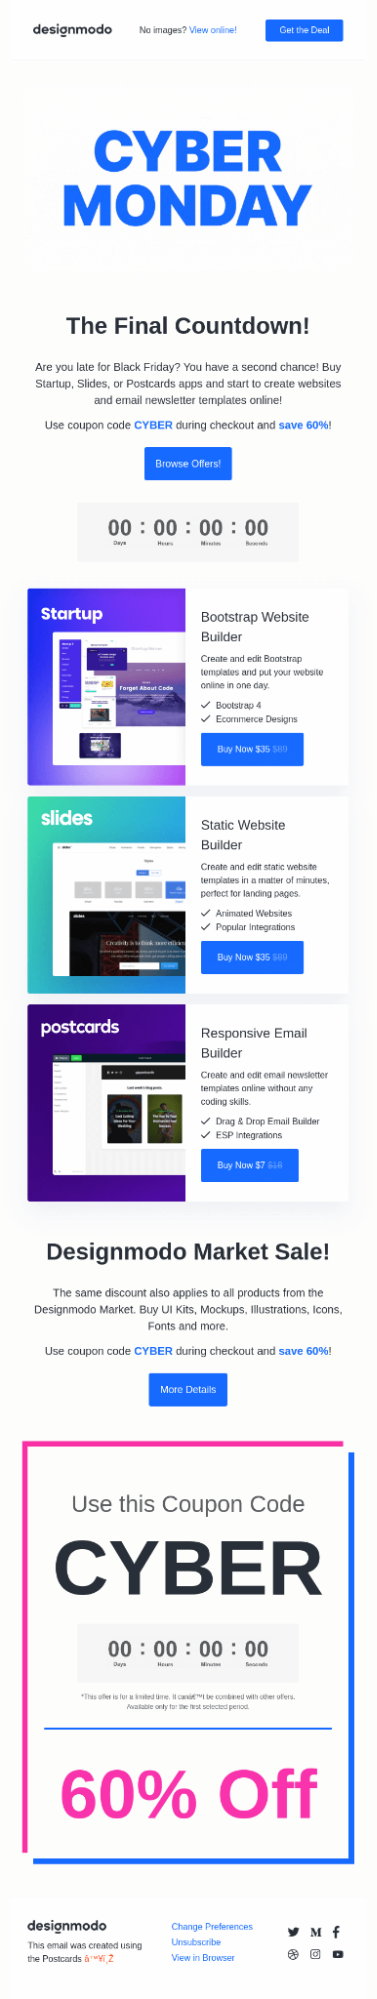 Designmodo Cyber Monday email template
